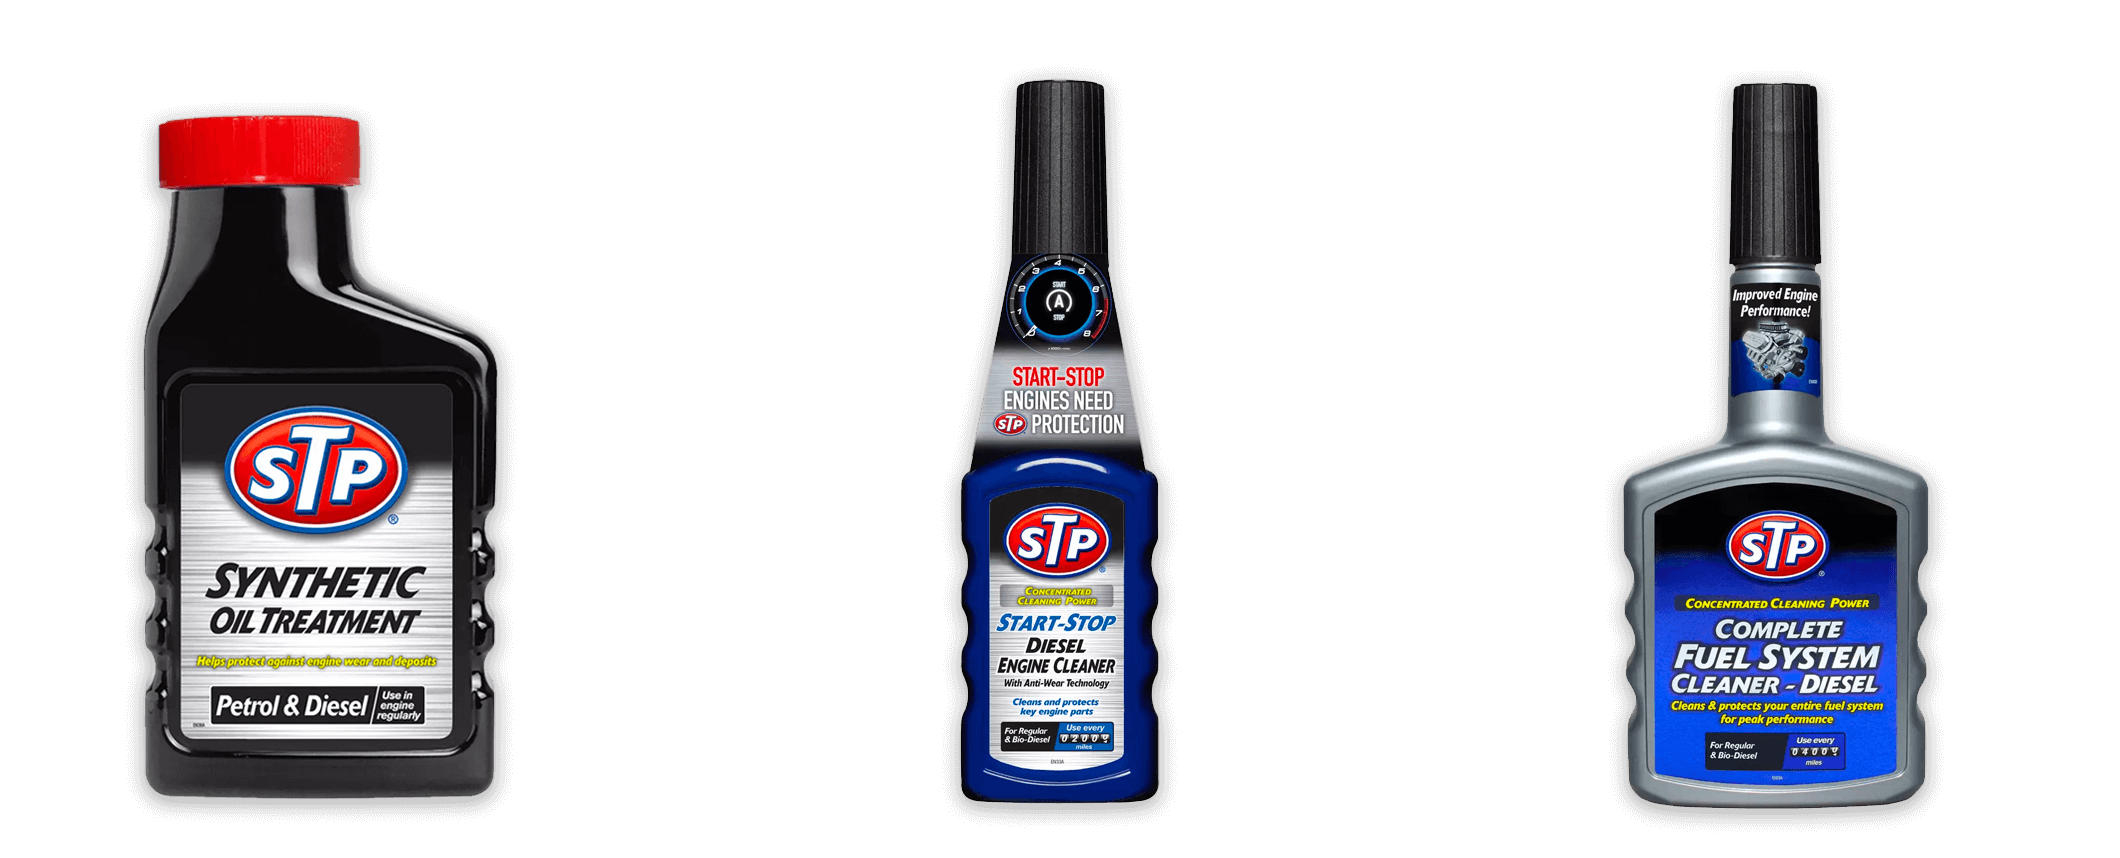 STP Oil Treatments for Diesel Engines